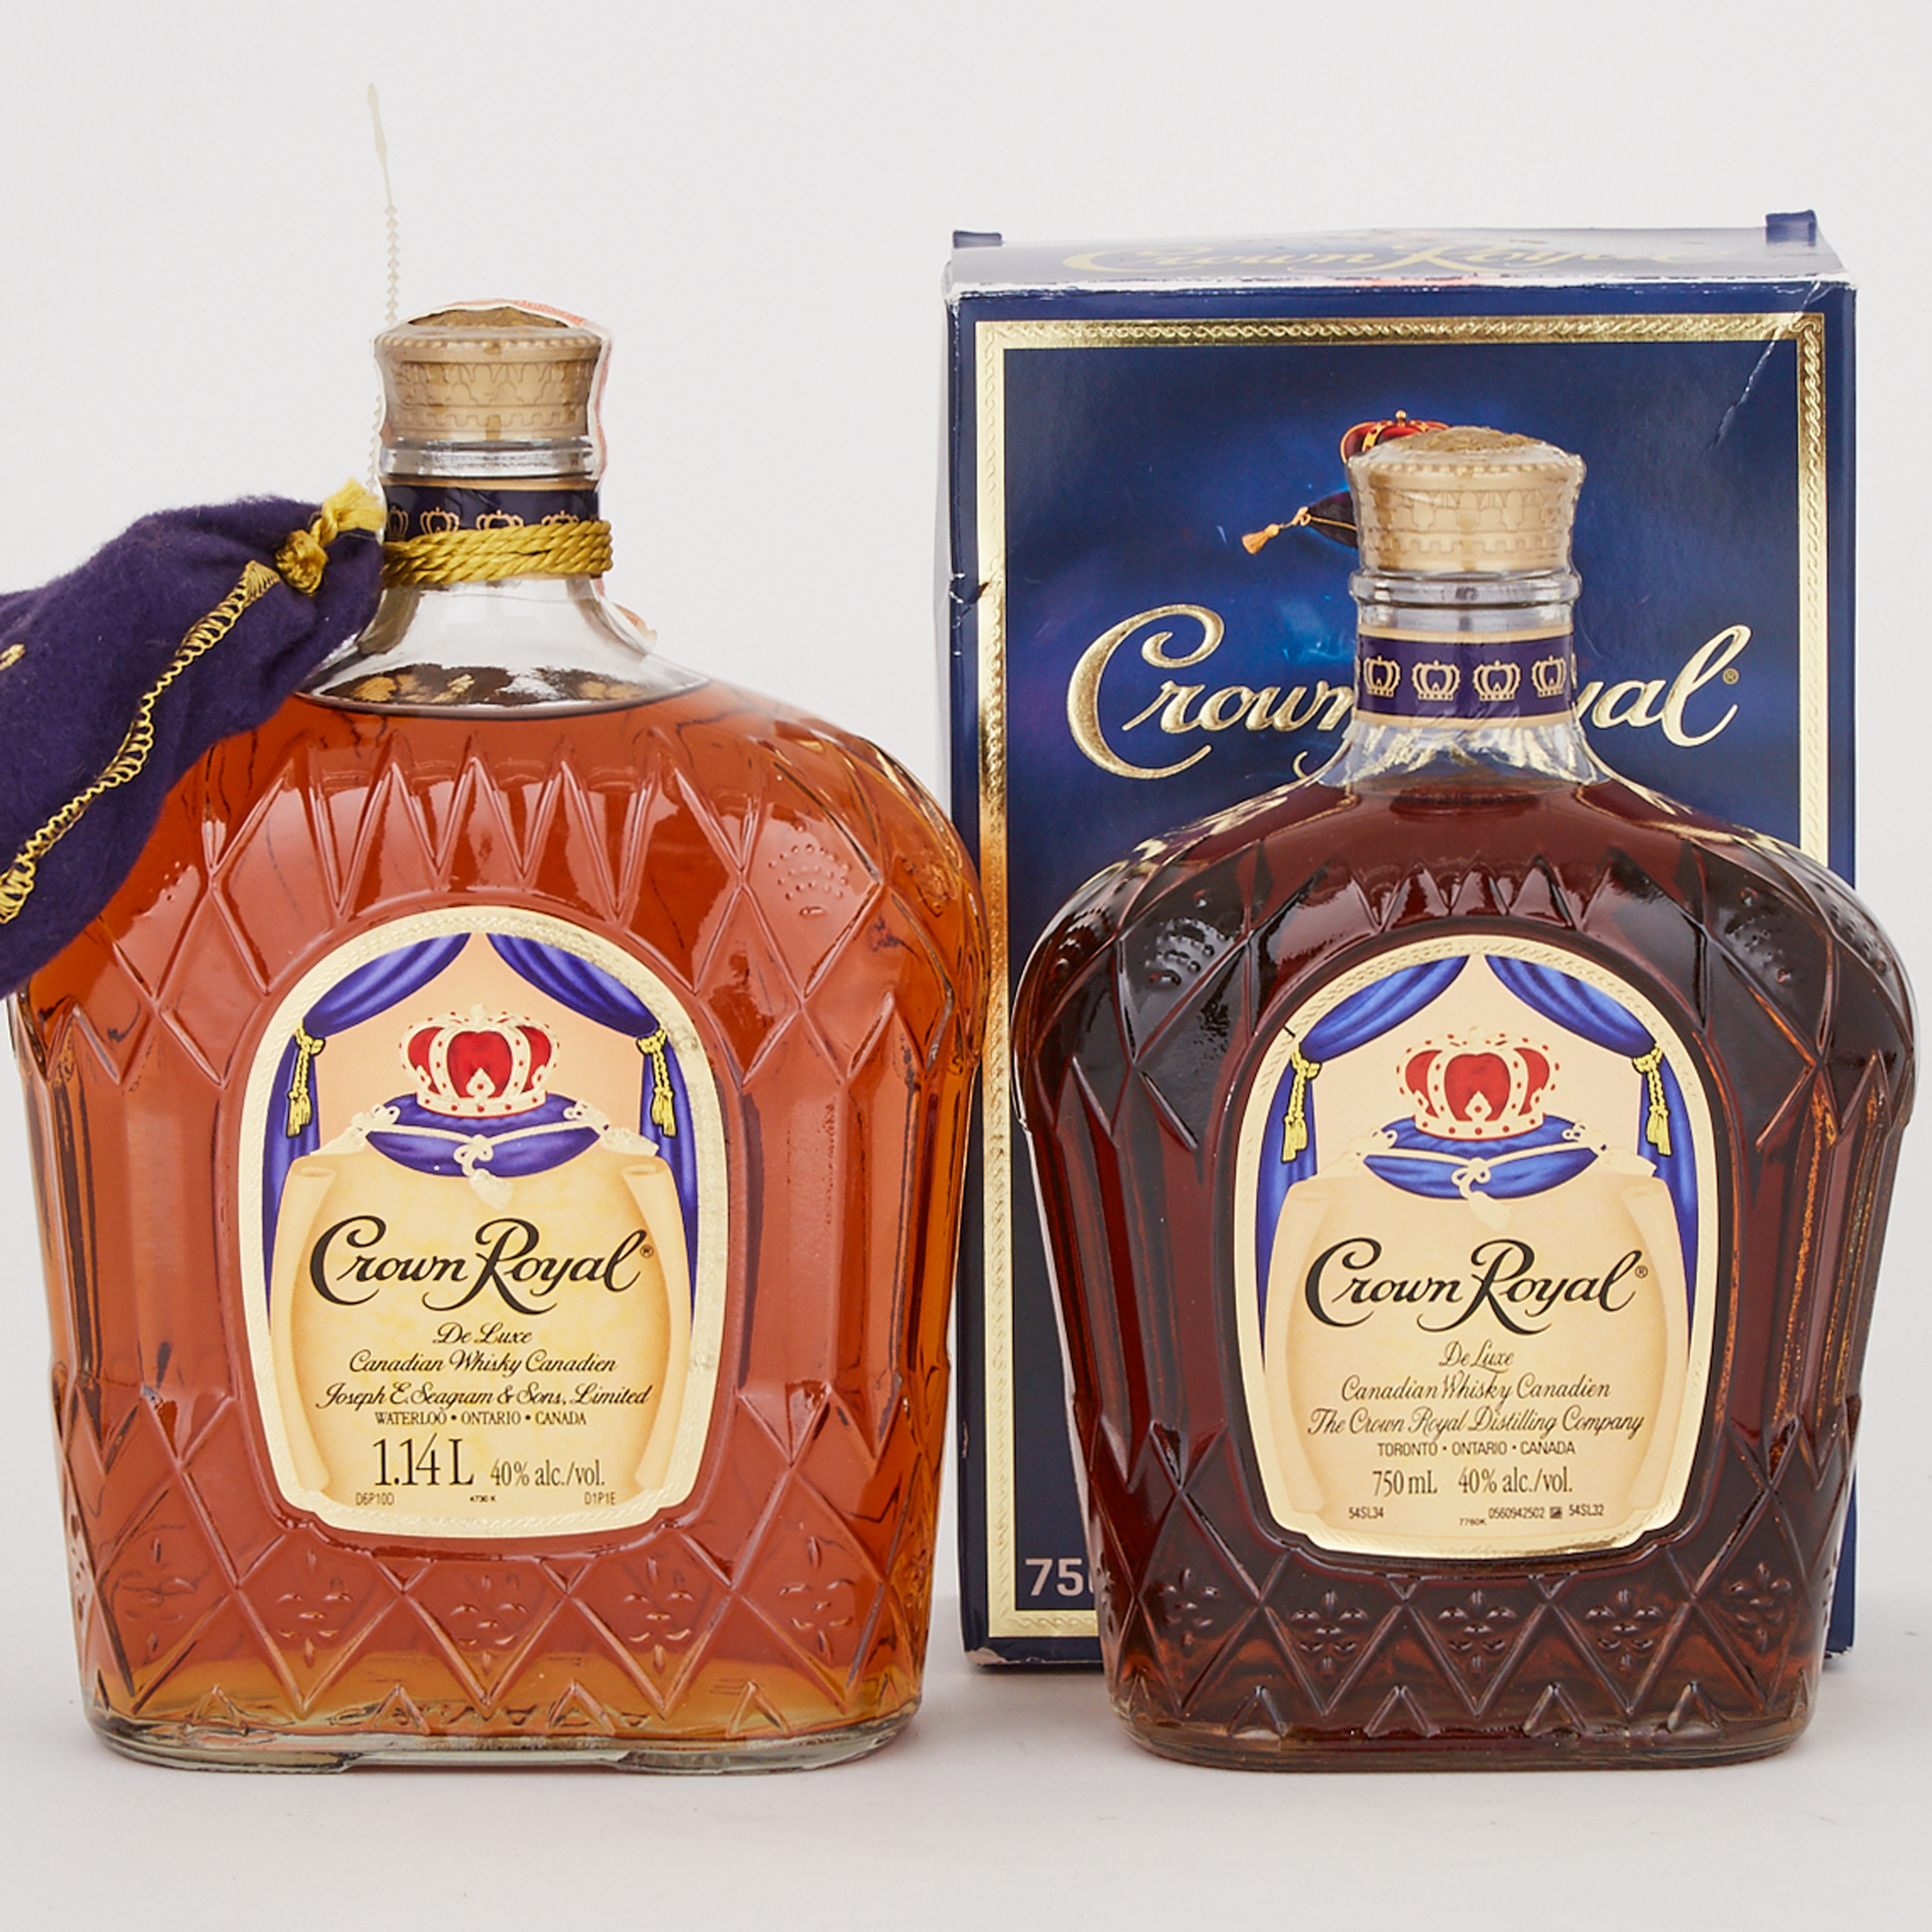 CROWN ROYAL DELUXE CANADIAN WHISKEY (ONE 750 ML)
CROWN ROYAL DELUXE CANADIAN WHISKEY (ONE 1140 ML)